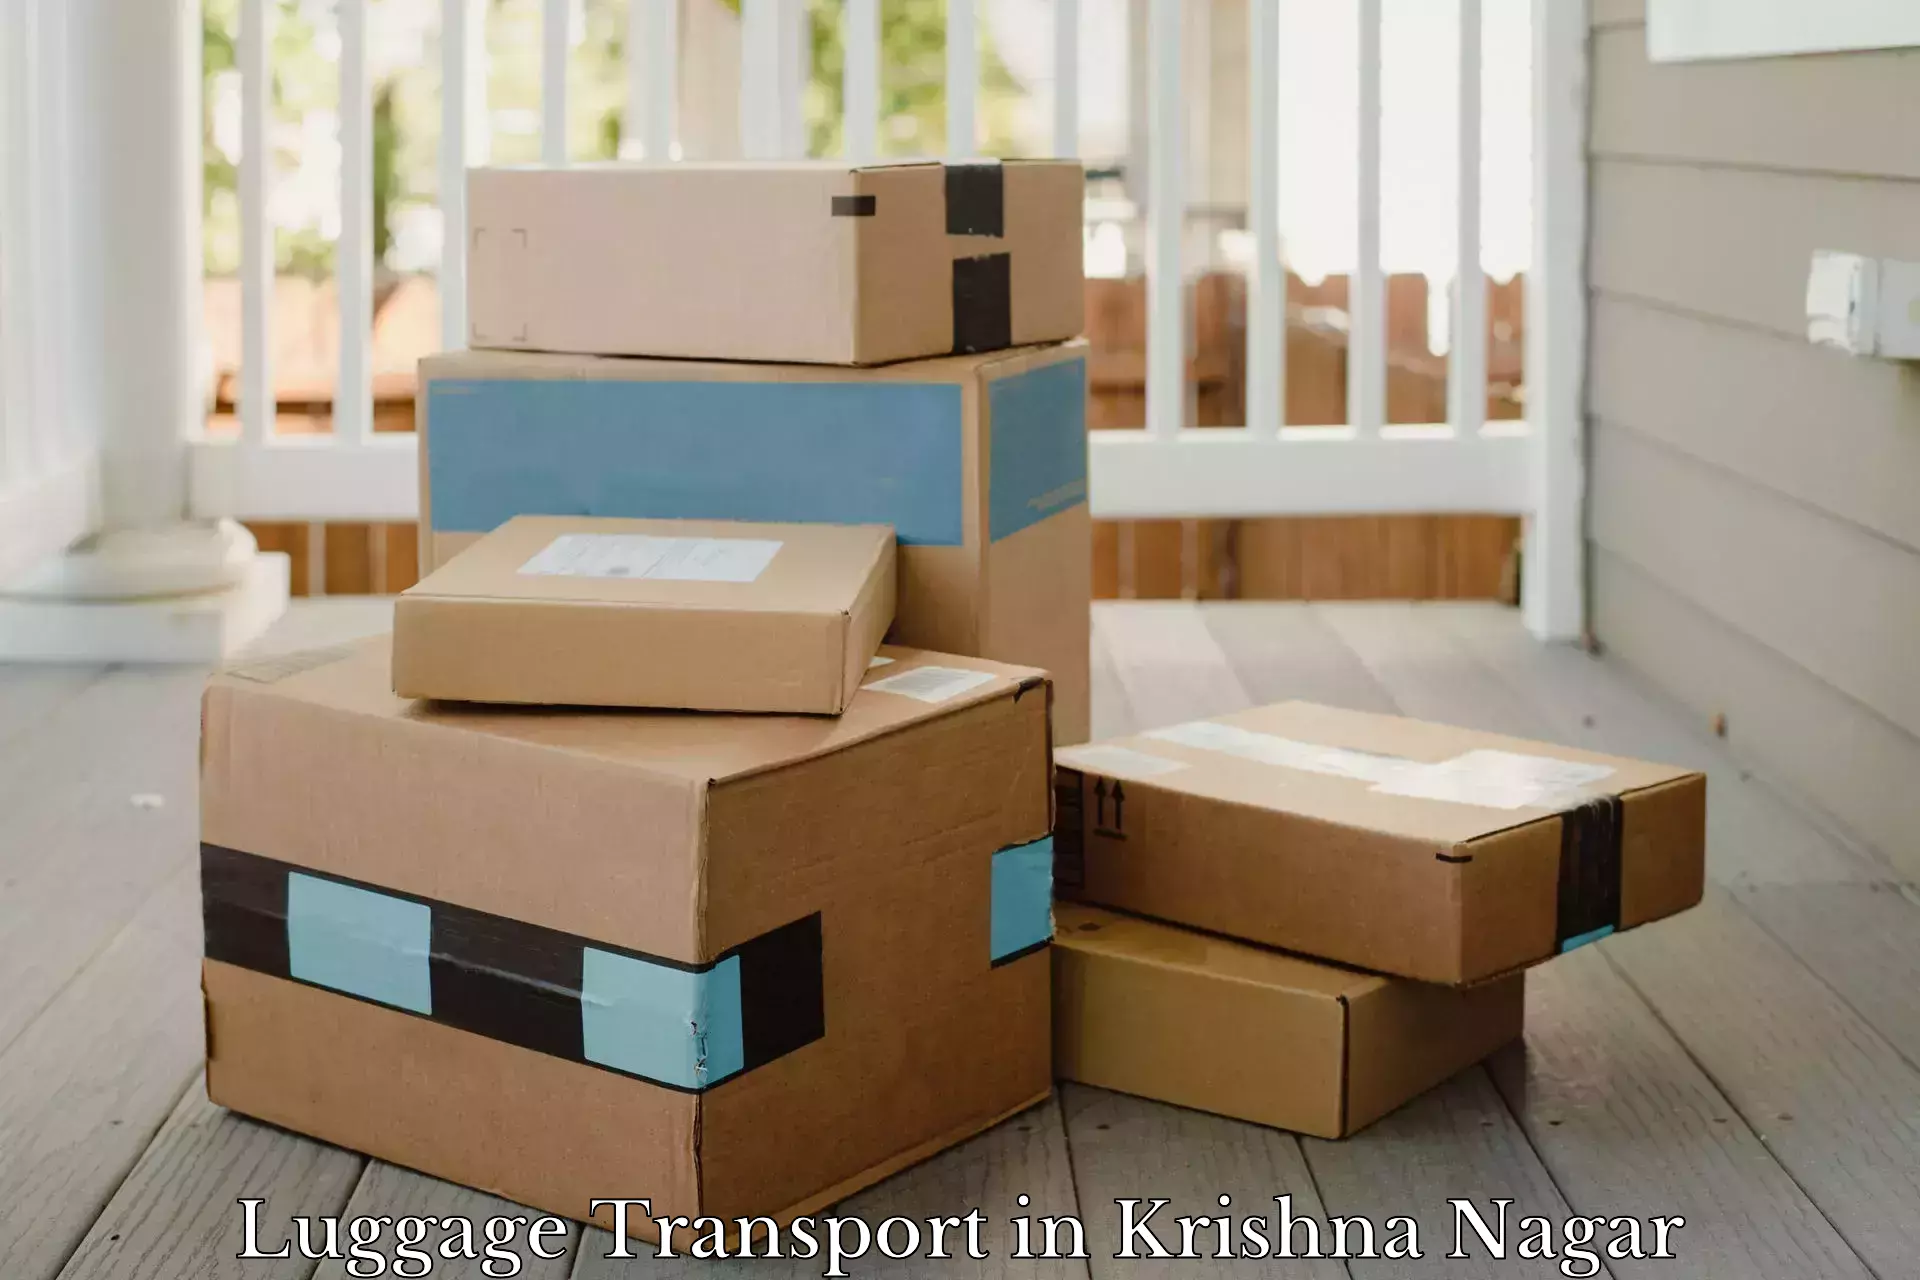 Baggage delivery support in Krishna Nagar